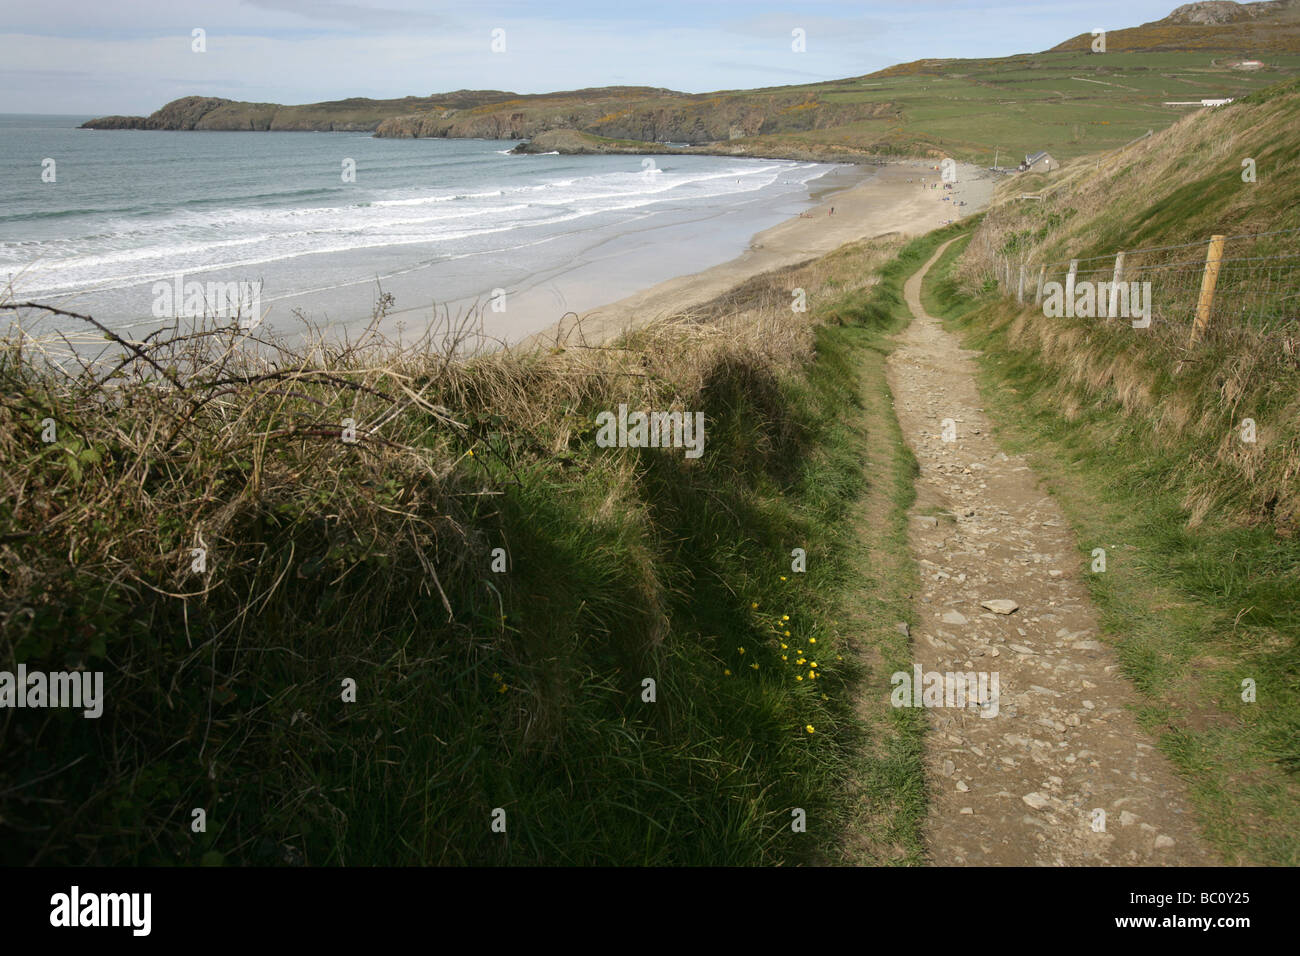 Area of Whitesands Bay, Wales. The Pembrokeshire Coastal Path route with Whitesands Bay in the background. Stock Photo